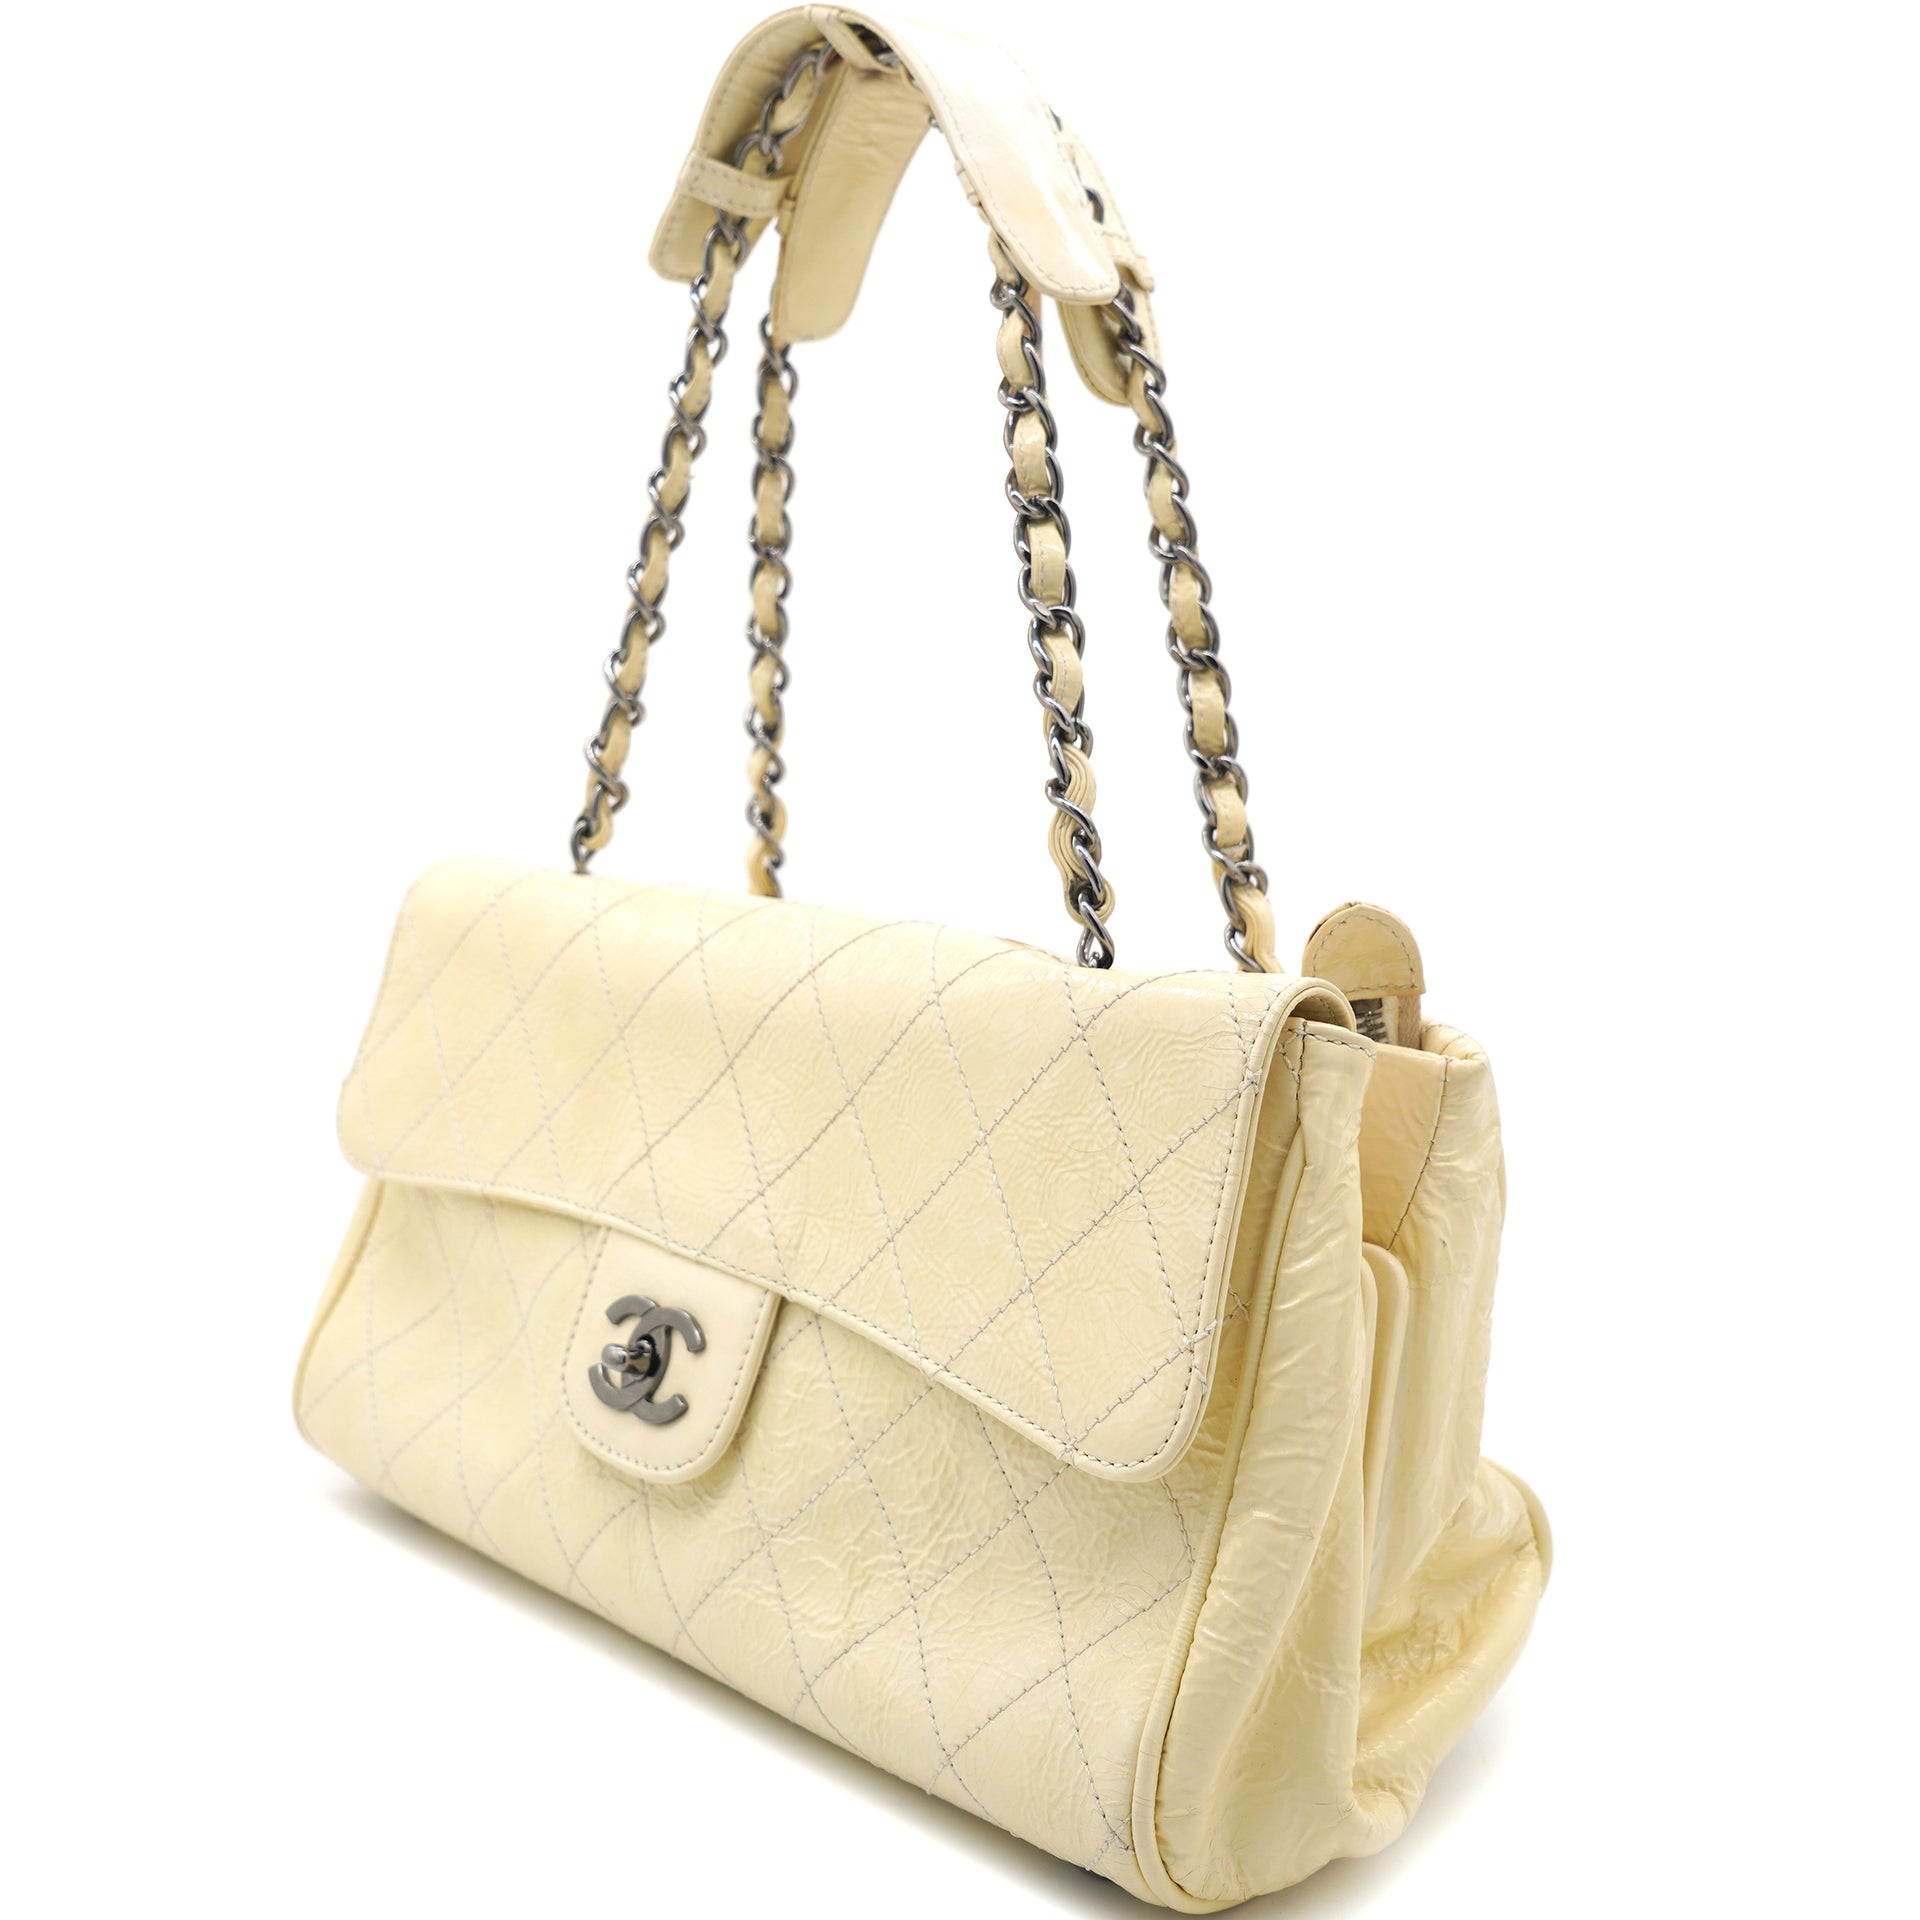 Chanel Yellow Leather Double Compartment Flap Shoulder Bag